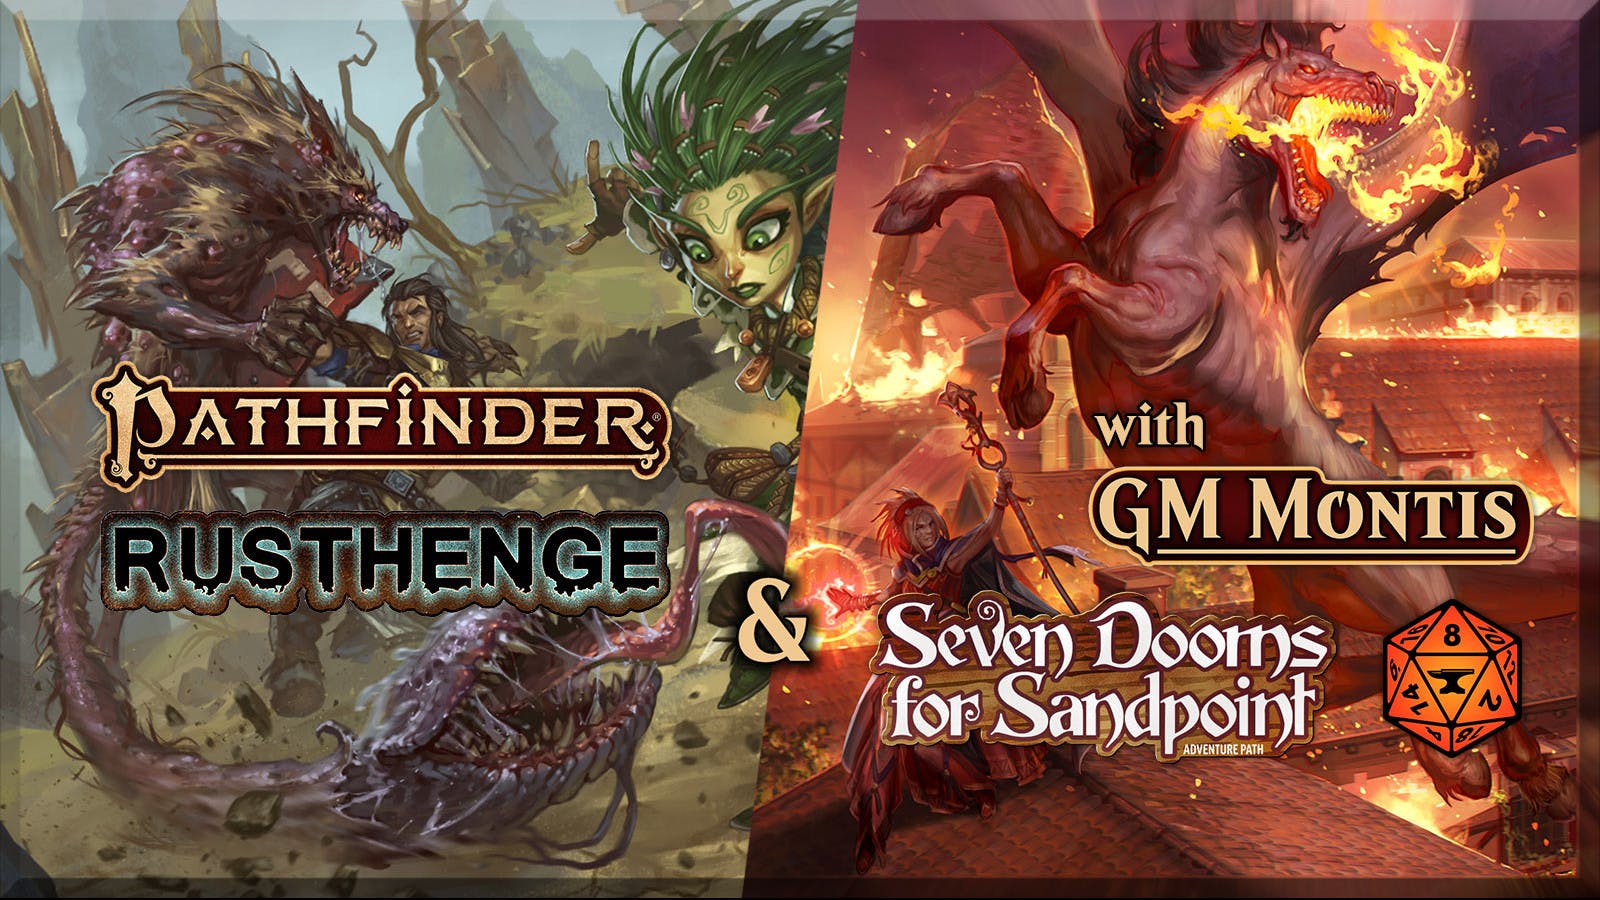 The Mysteries of New Thassilon - Rusthenge & Seven Dooms for Sandpoint